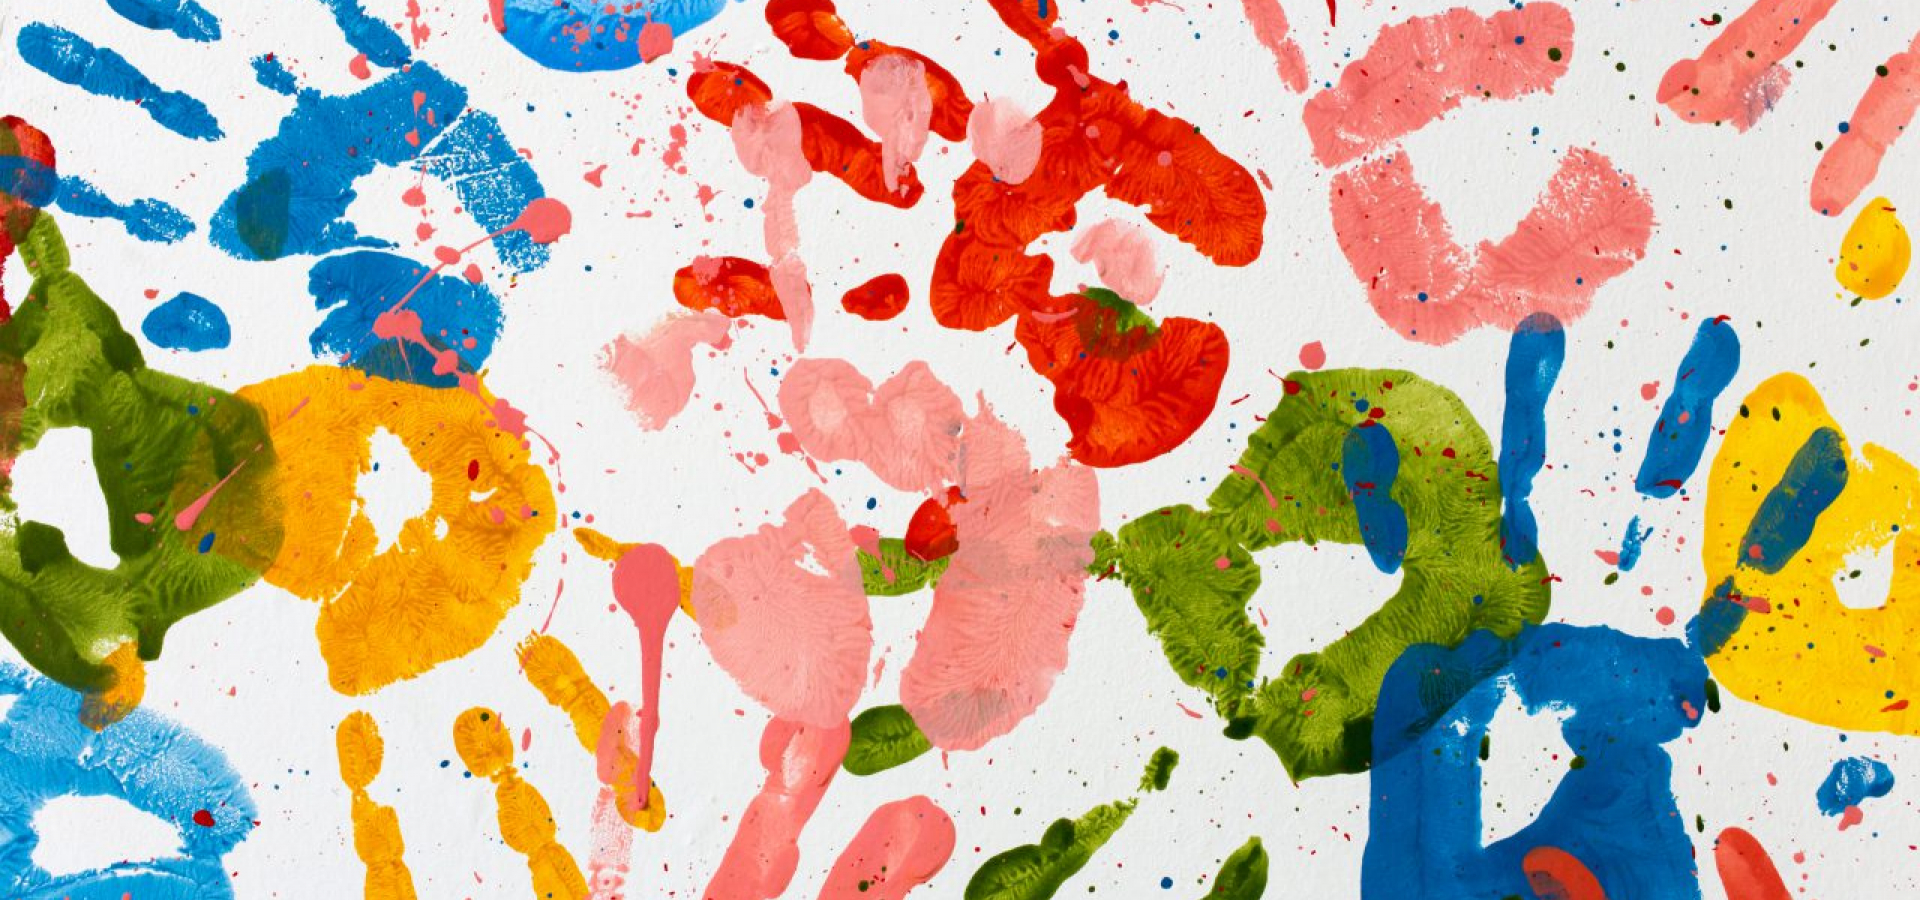 Series of colorful handprints